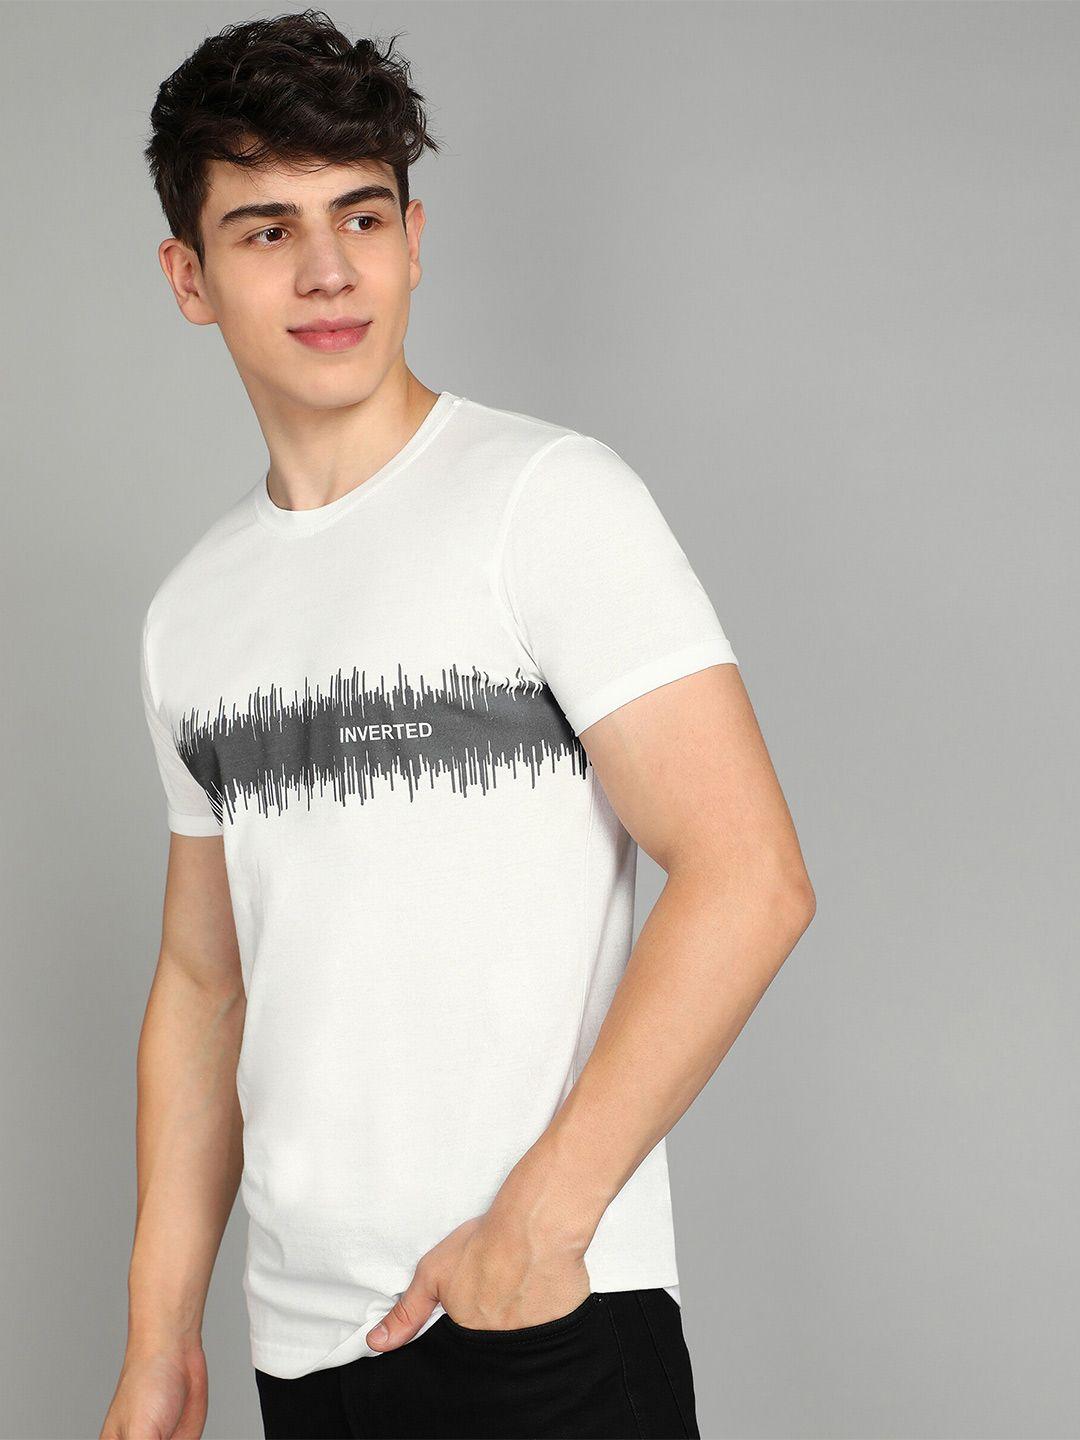 luke & lilly graphic printed cotton casual t-shirt